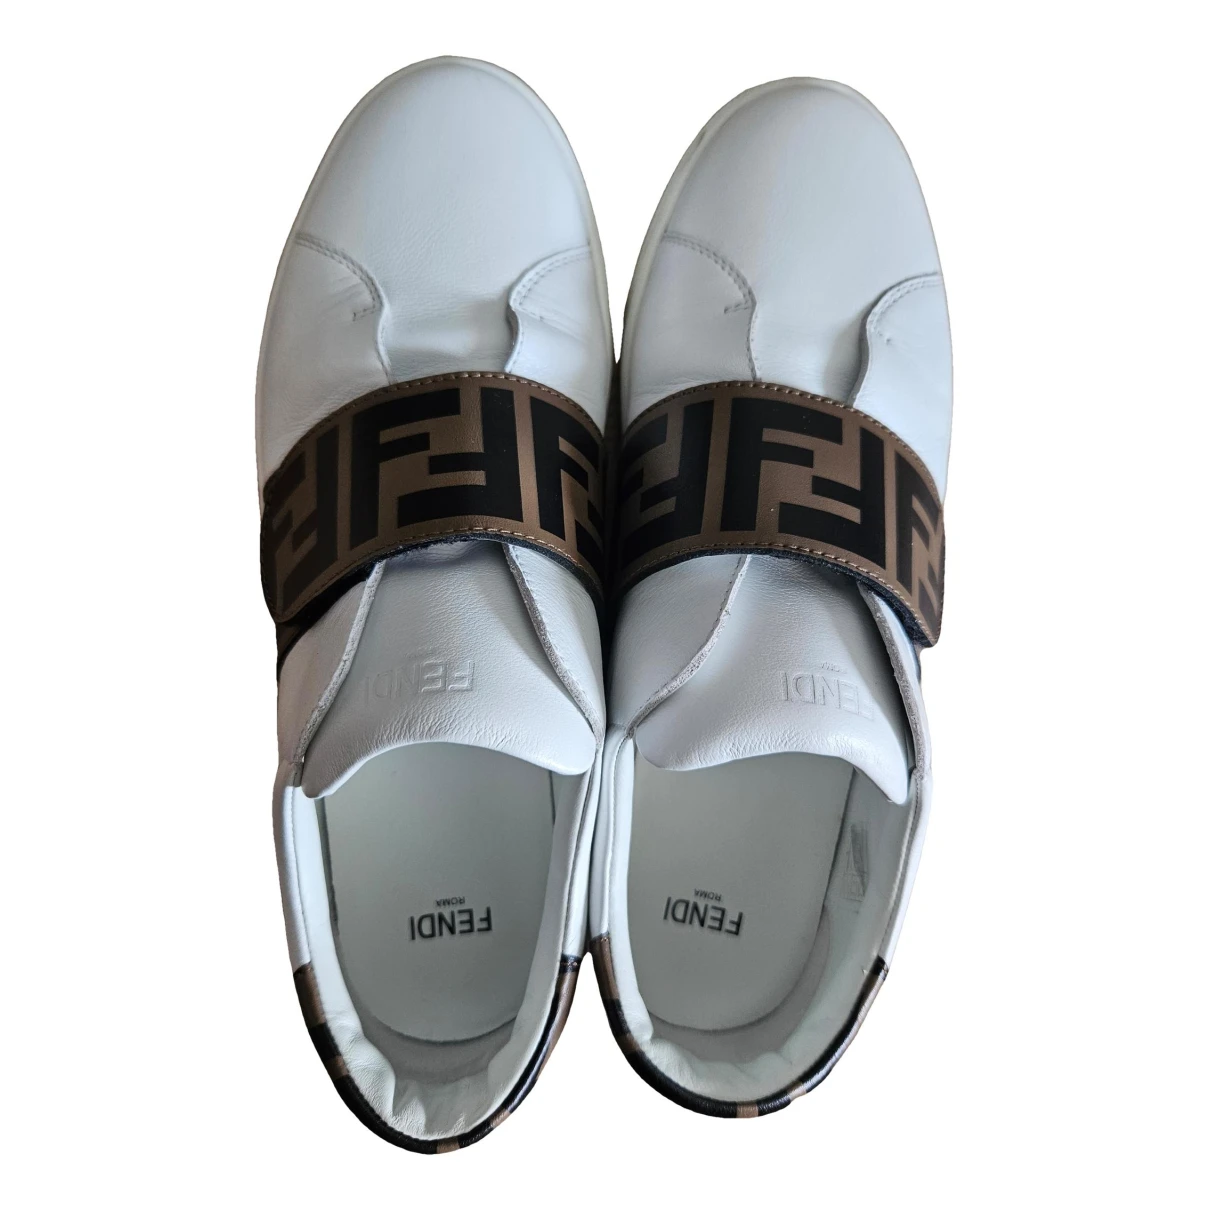 Pre-owned Fendi Leather Trainers In White